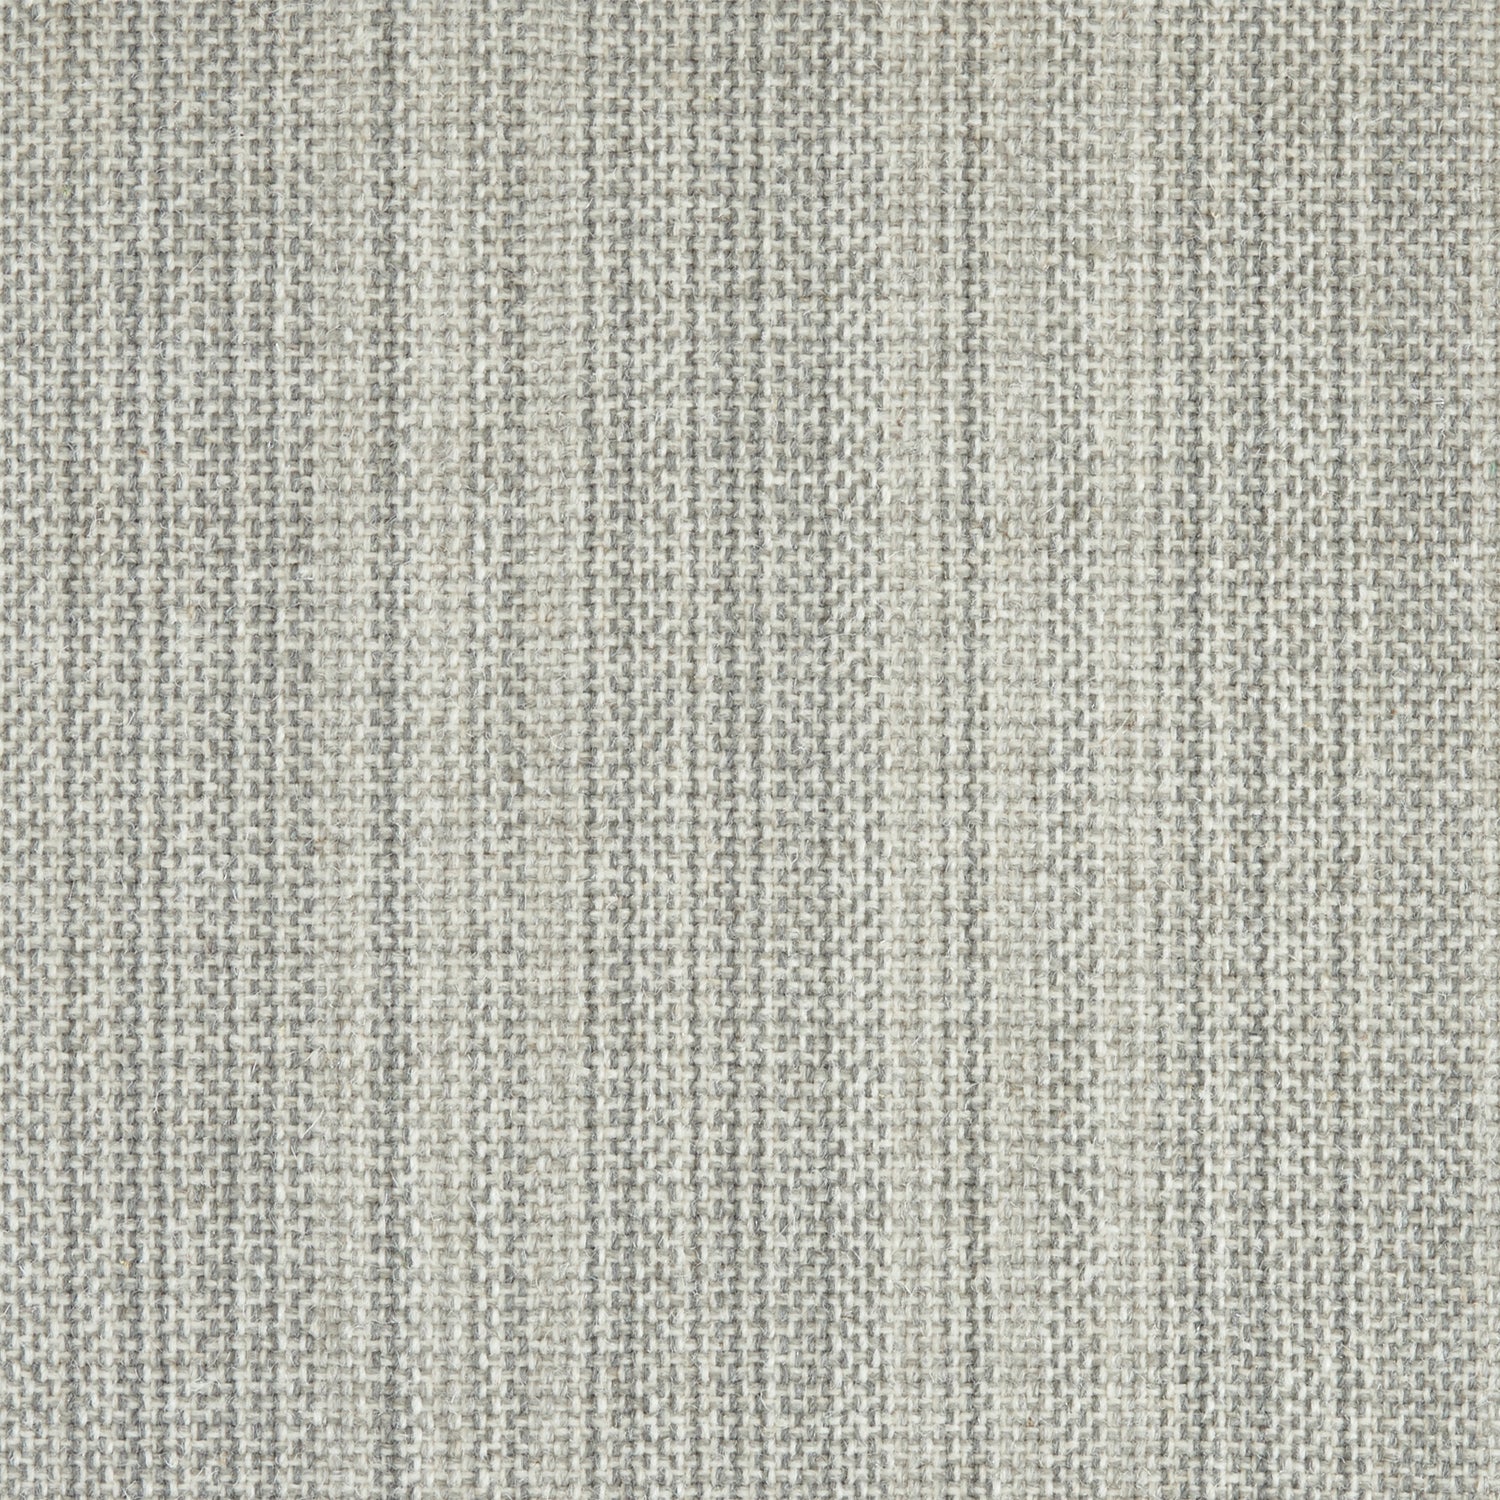 Wool broadloom carpet swatch in a light gray colorway mottled with white and gray fibers.